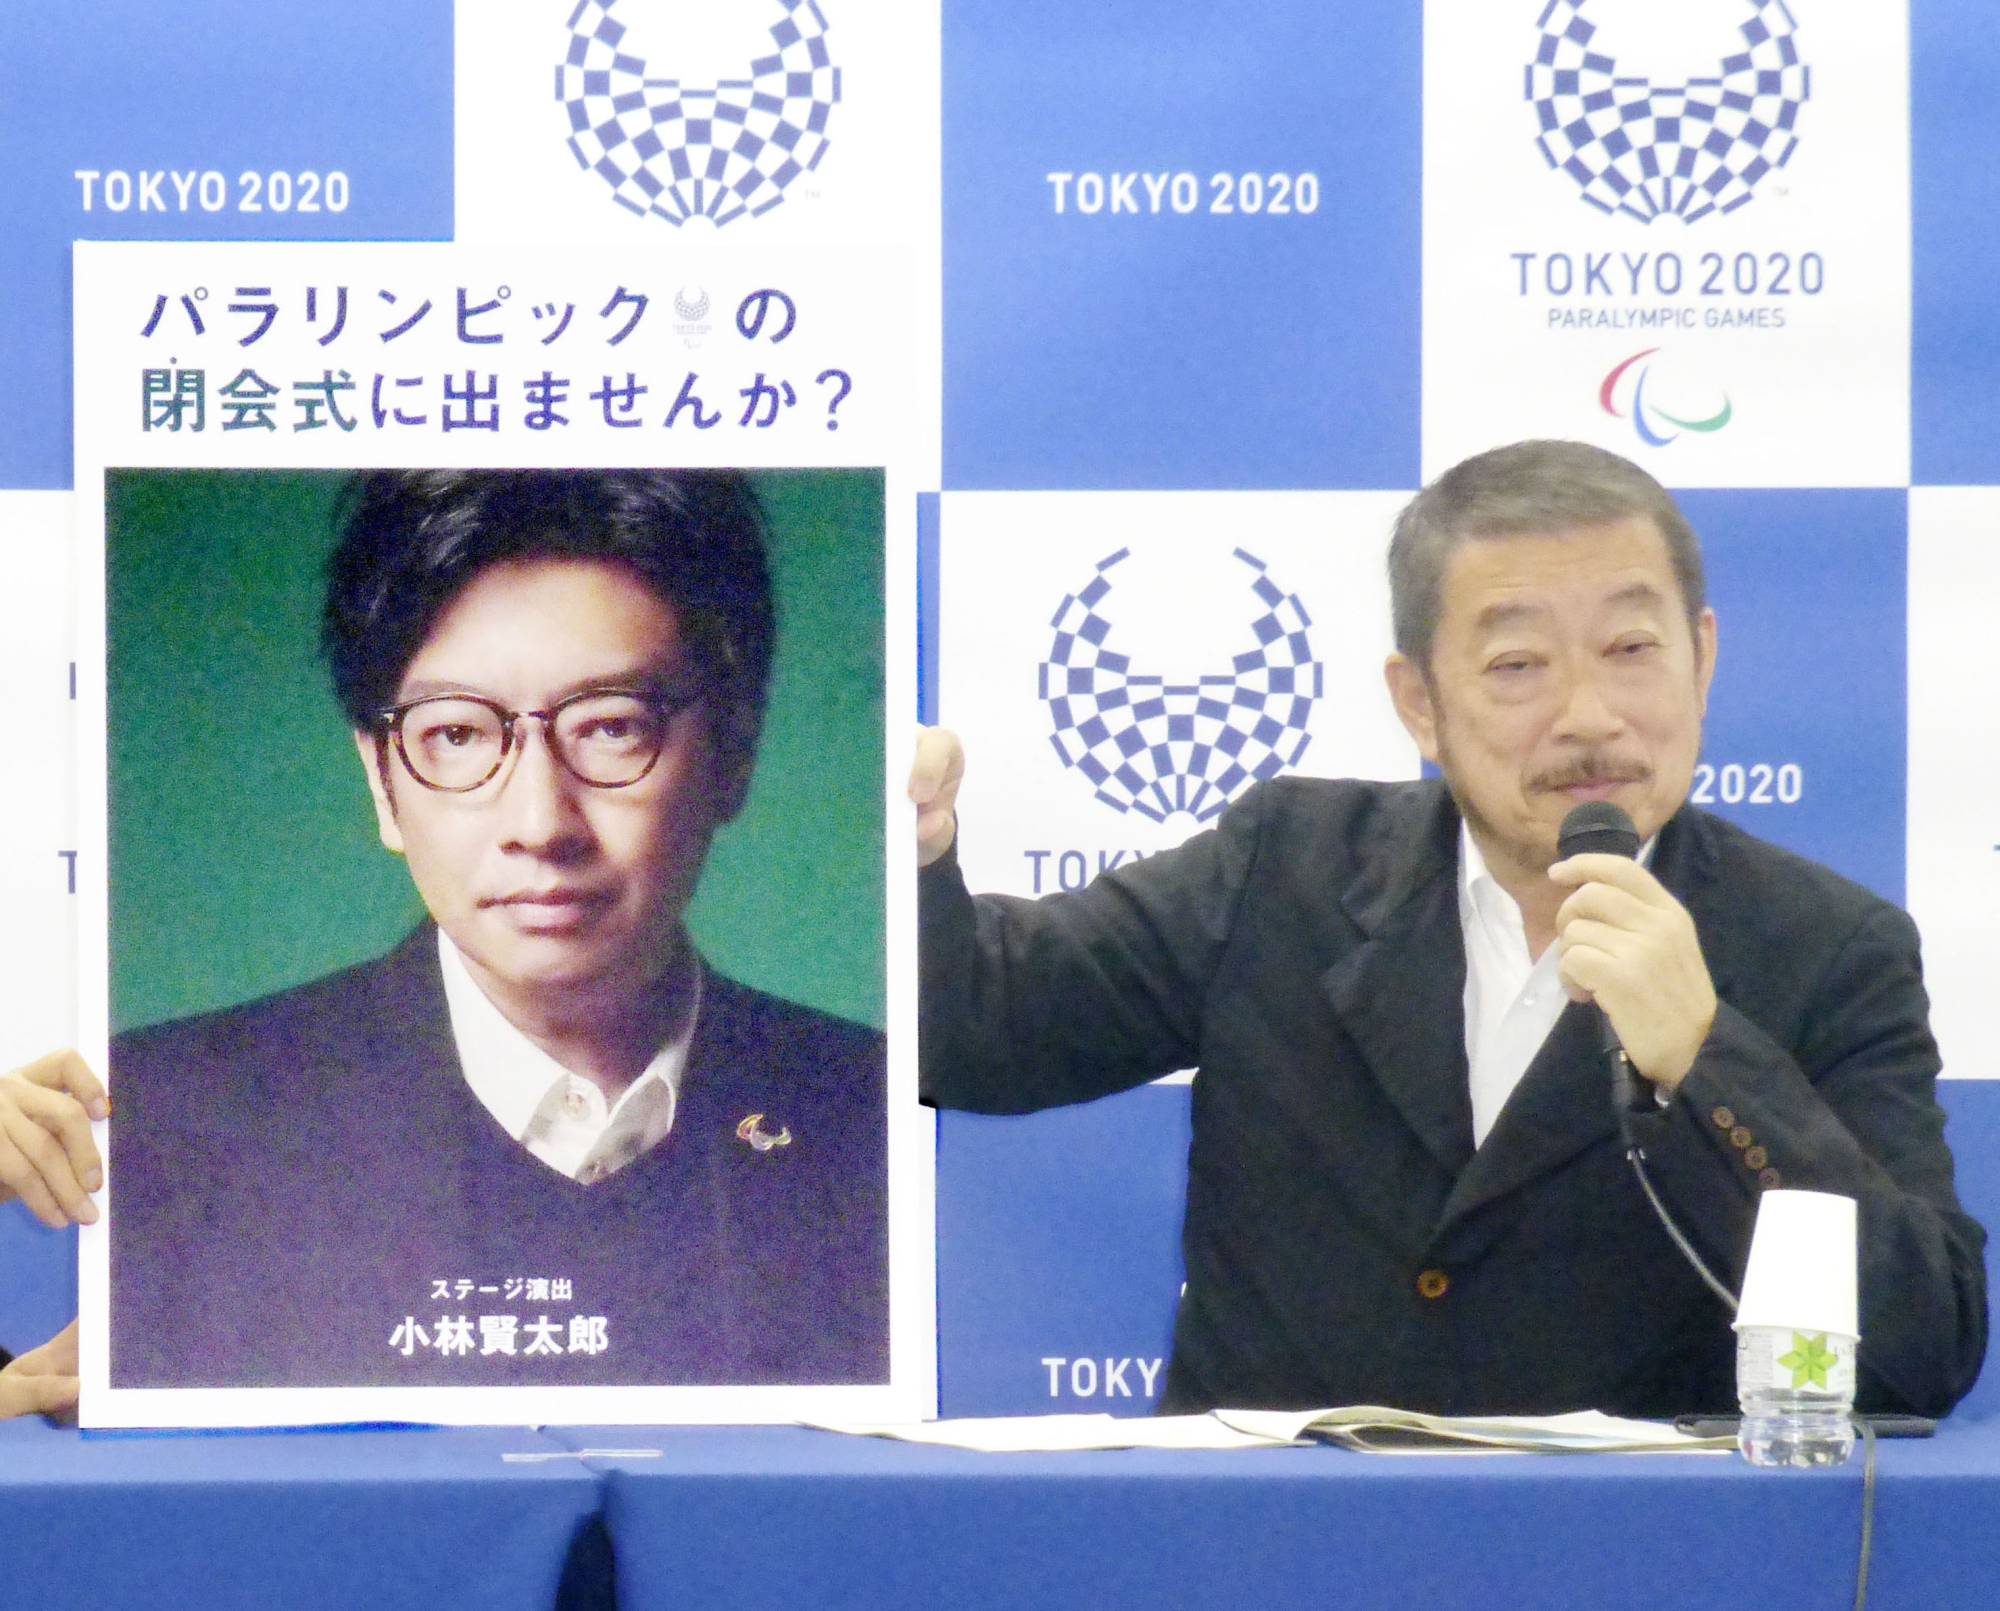 Kentaro Kobayashi (pictured on a poster) is introduced as the opening ceremony director for the Olympics and Paralympics during a news conference in December 2019. | KYODO